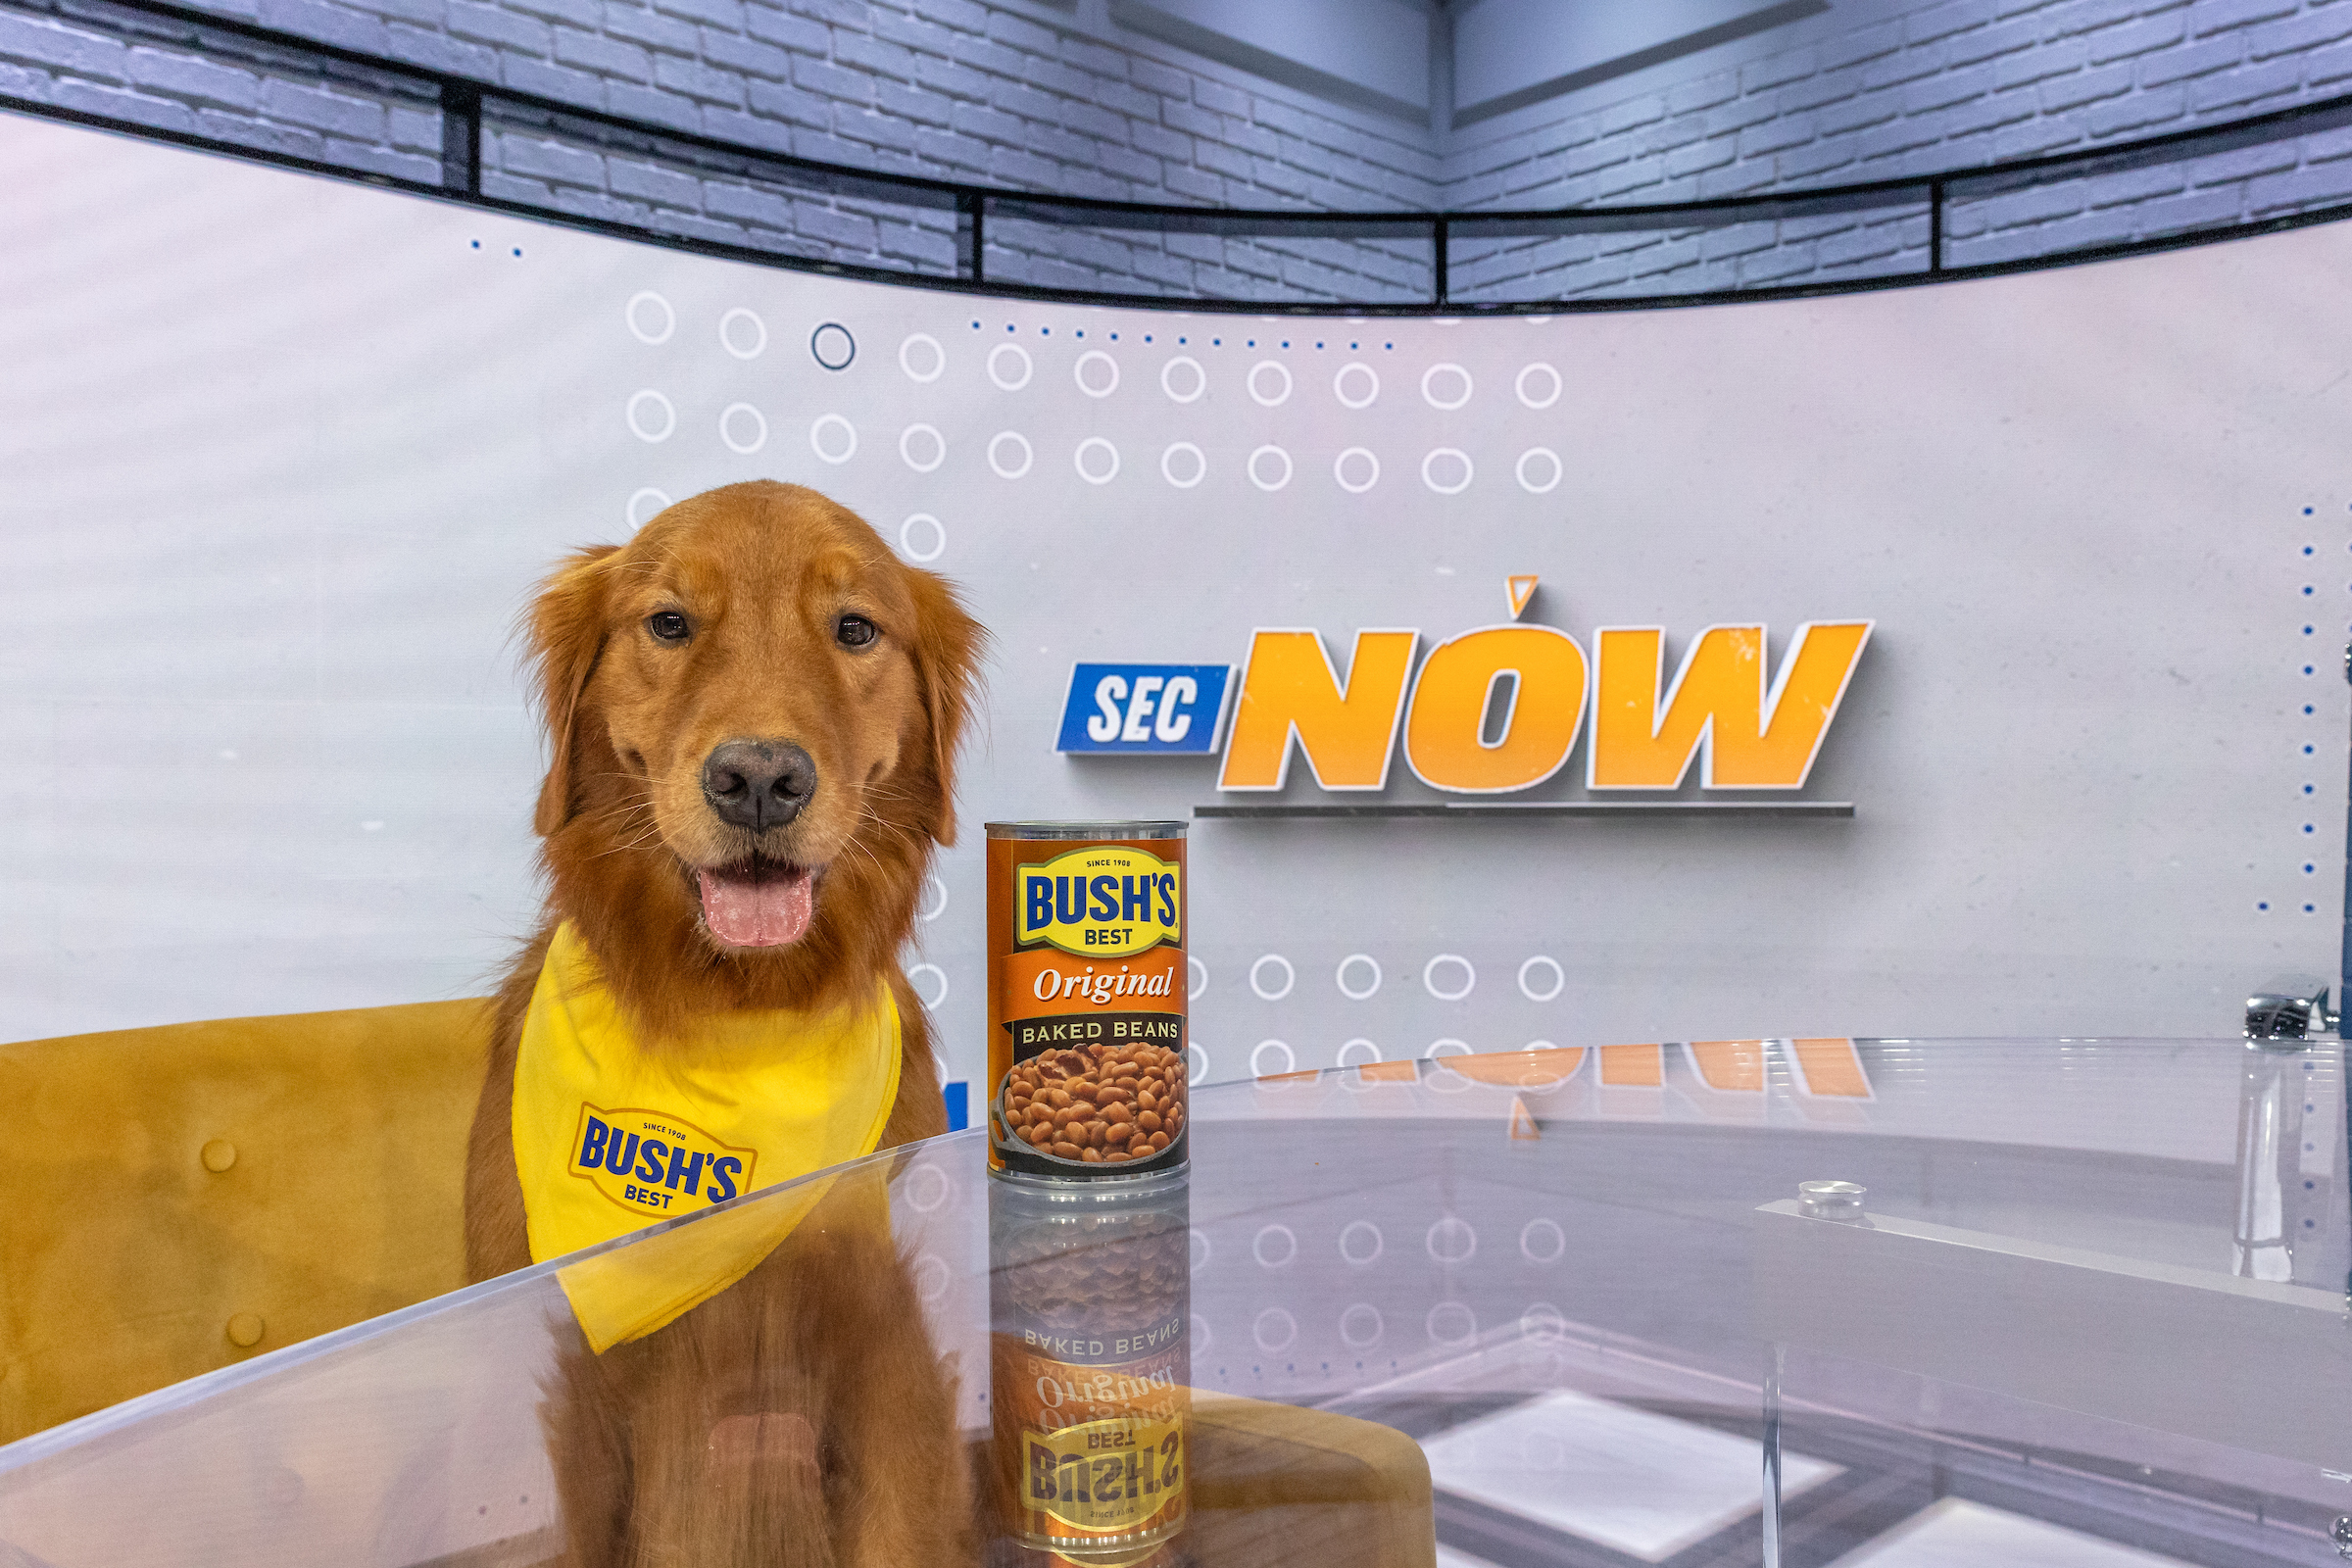 There's a new dawg in town. Bush's Beans announced its sponsorship of The Southeastern Conference as the "Official Beans of the SEC" with help from spokes dog, Duke, and SEC Network personality, Laura Rutledge.